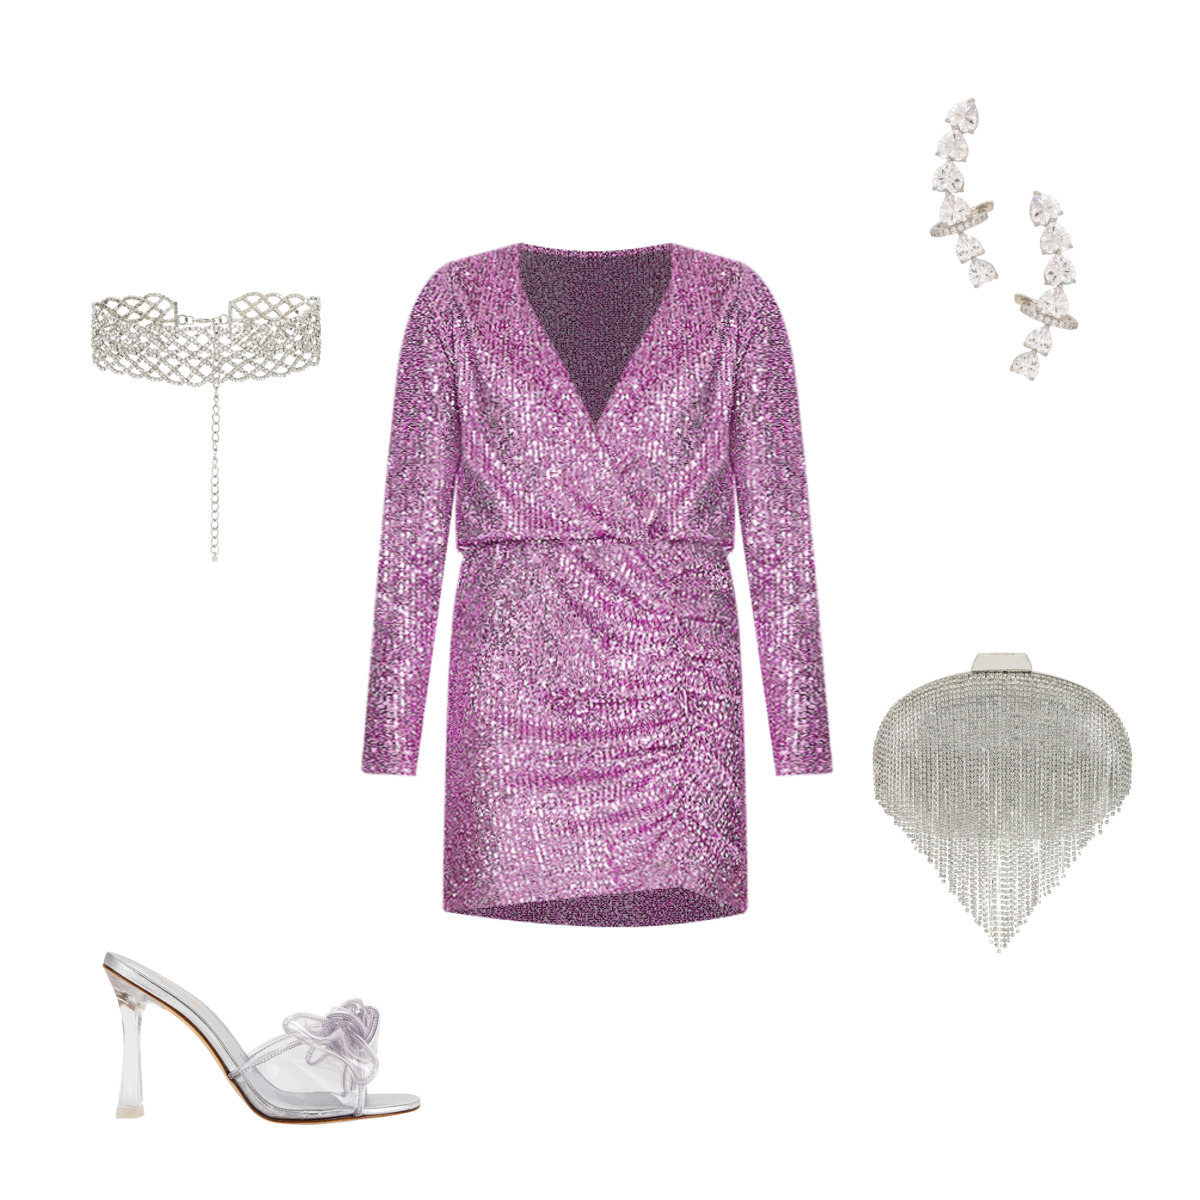 Outfit features purple glittery long sleeve v-neck faux wrap cocktail dress, silver choker, silver earrings, silver clutch and silver and clear sandal pumps. 